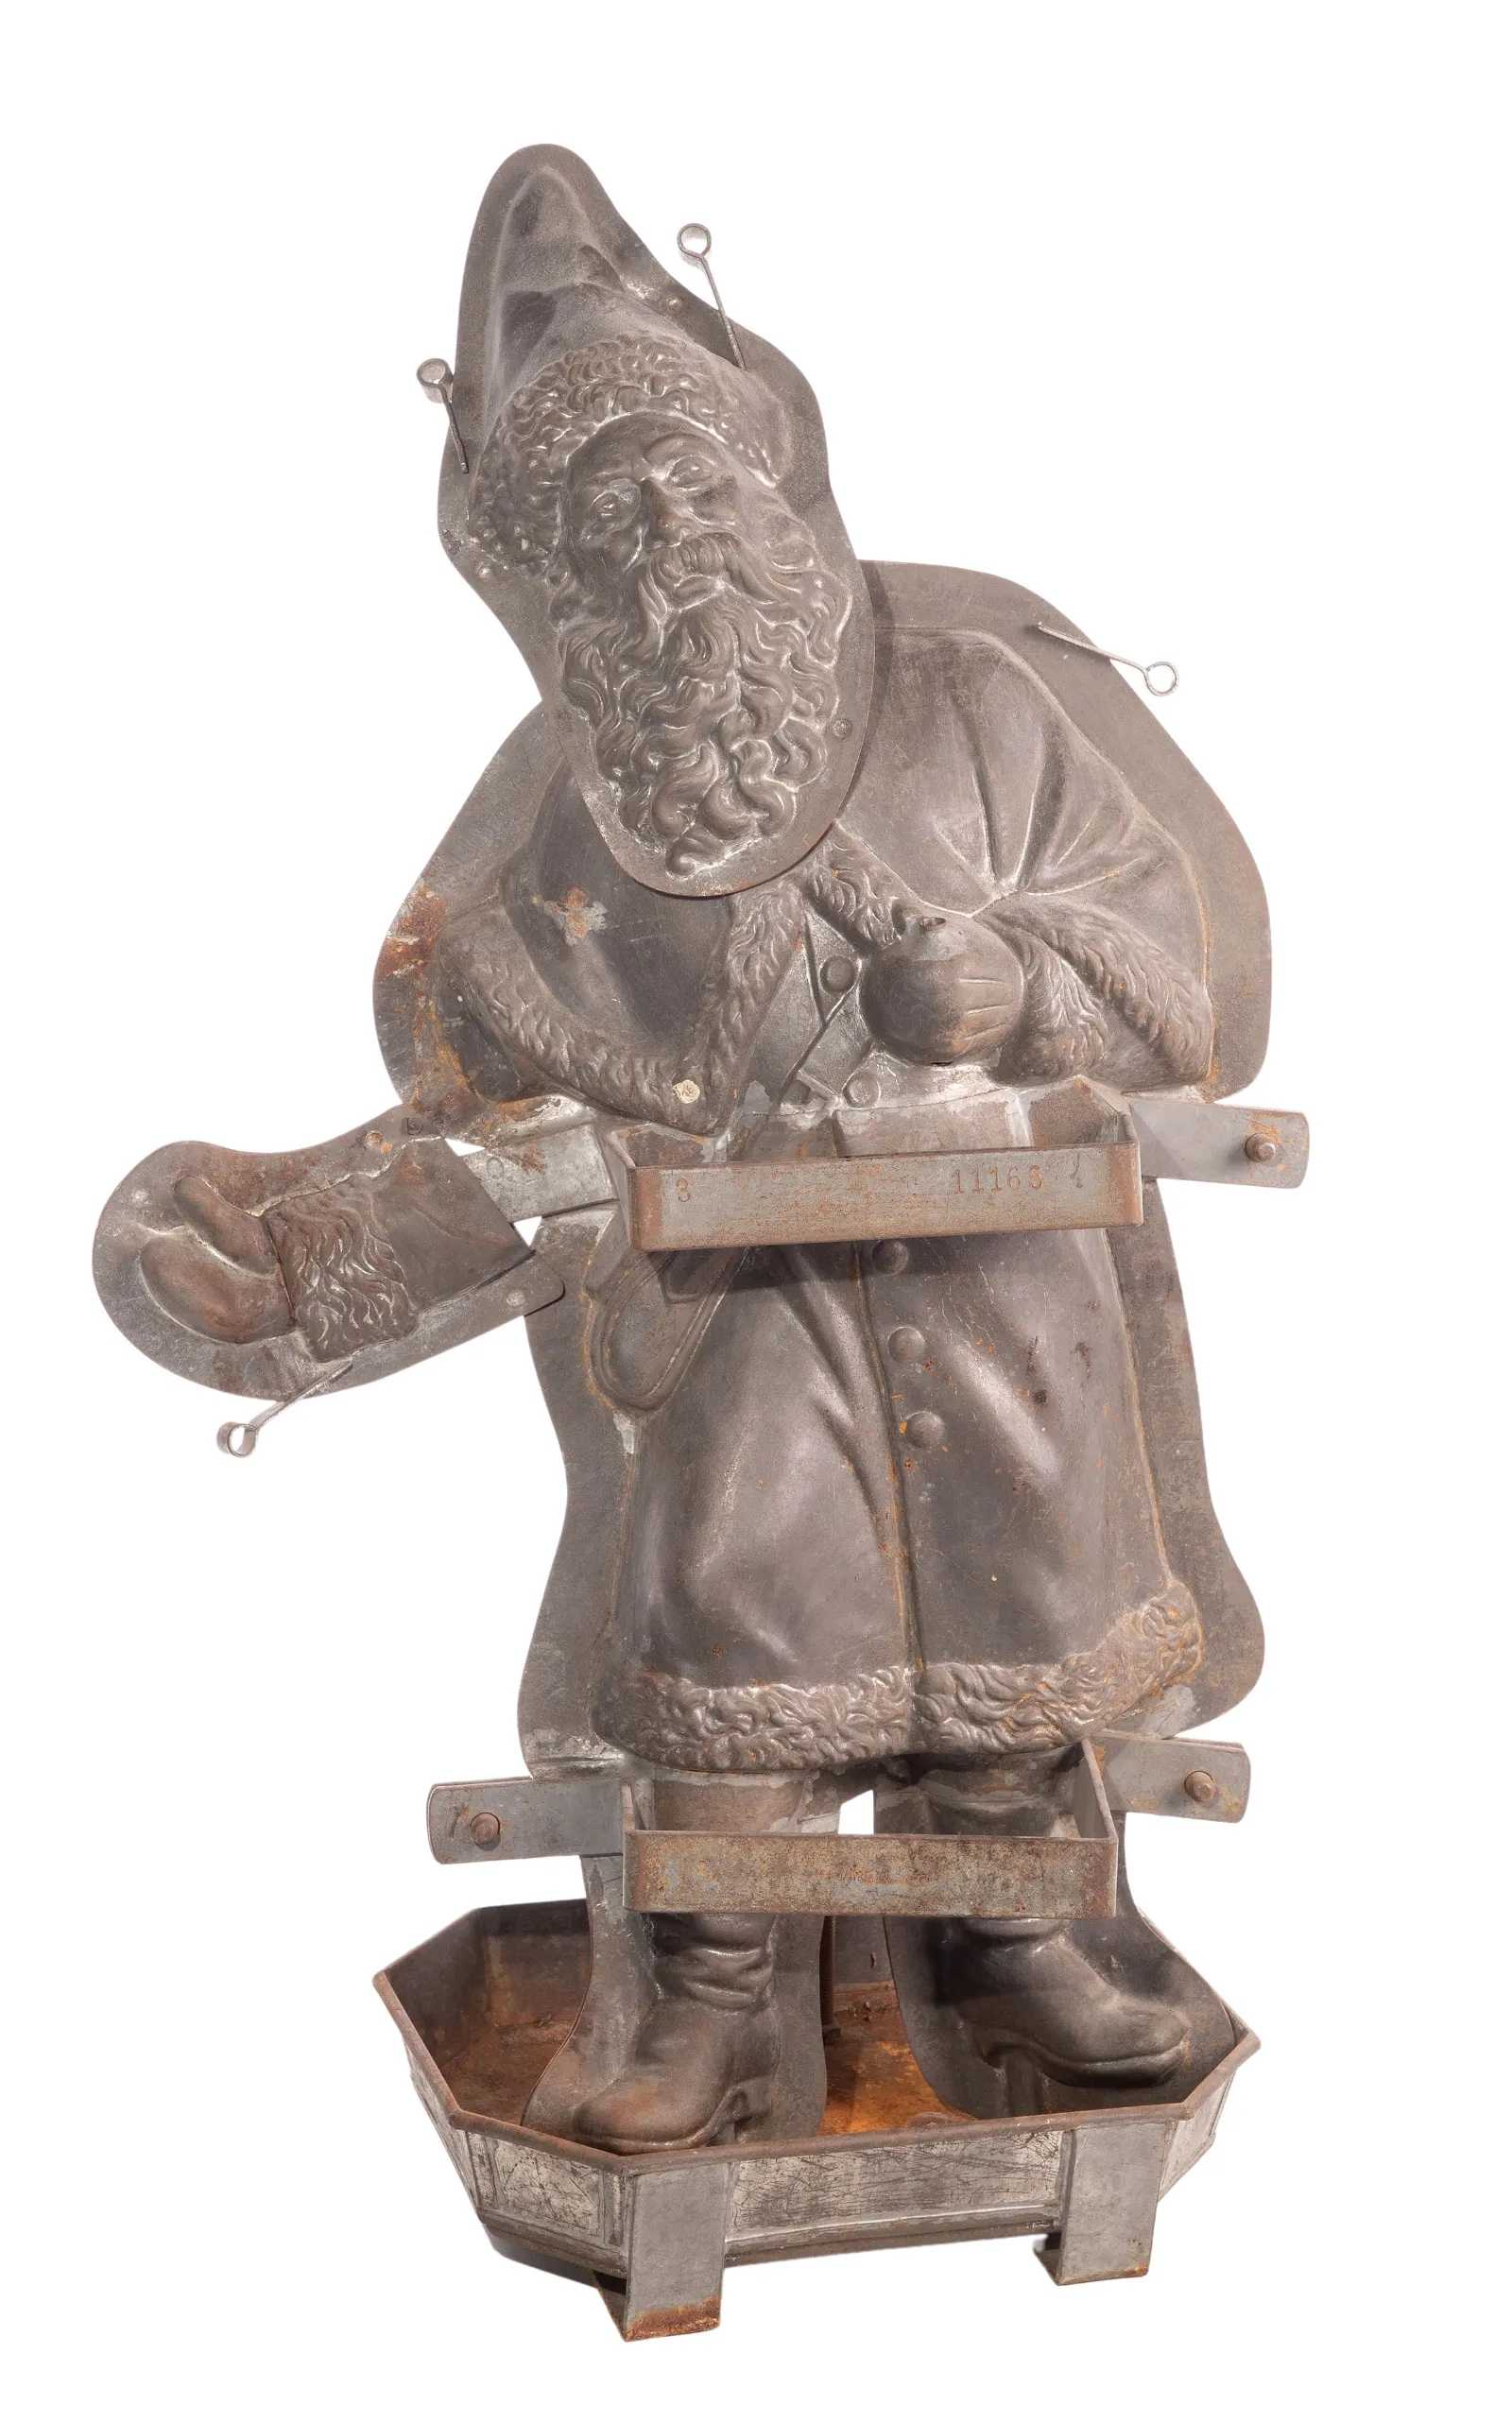 Anton Reiche showpiece chocolate mold in the form of Santa Claus, which sold for $11,000 ($18,750 with buyer's premium) at Leonard.